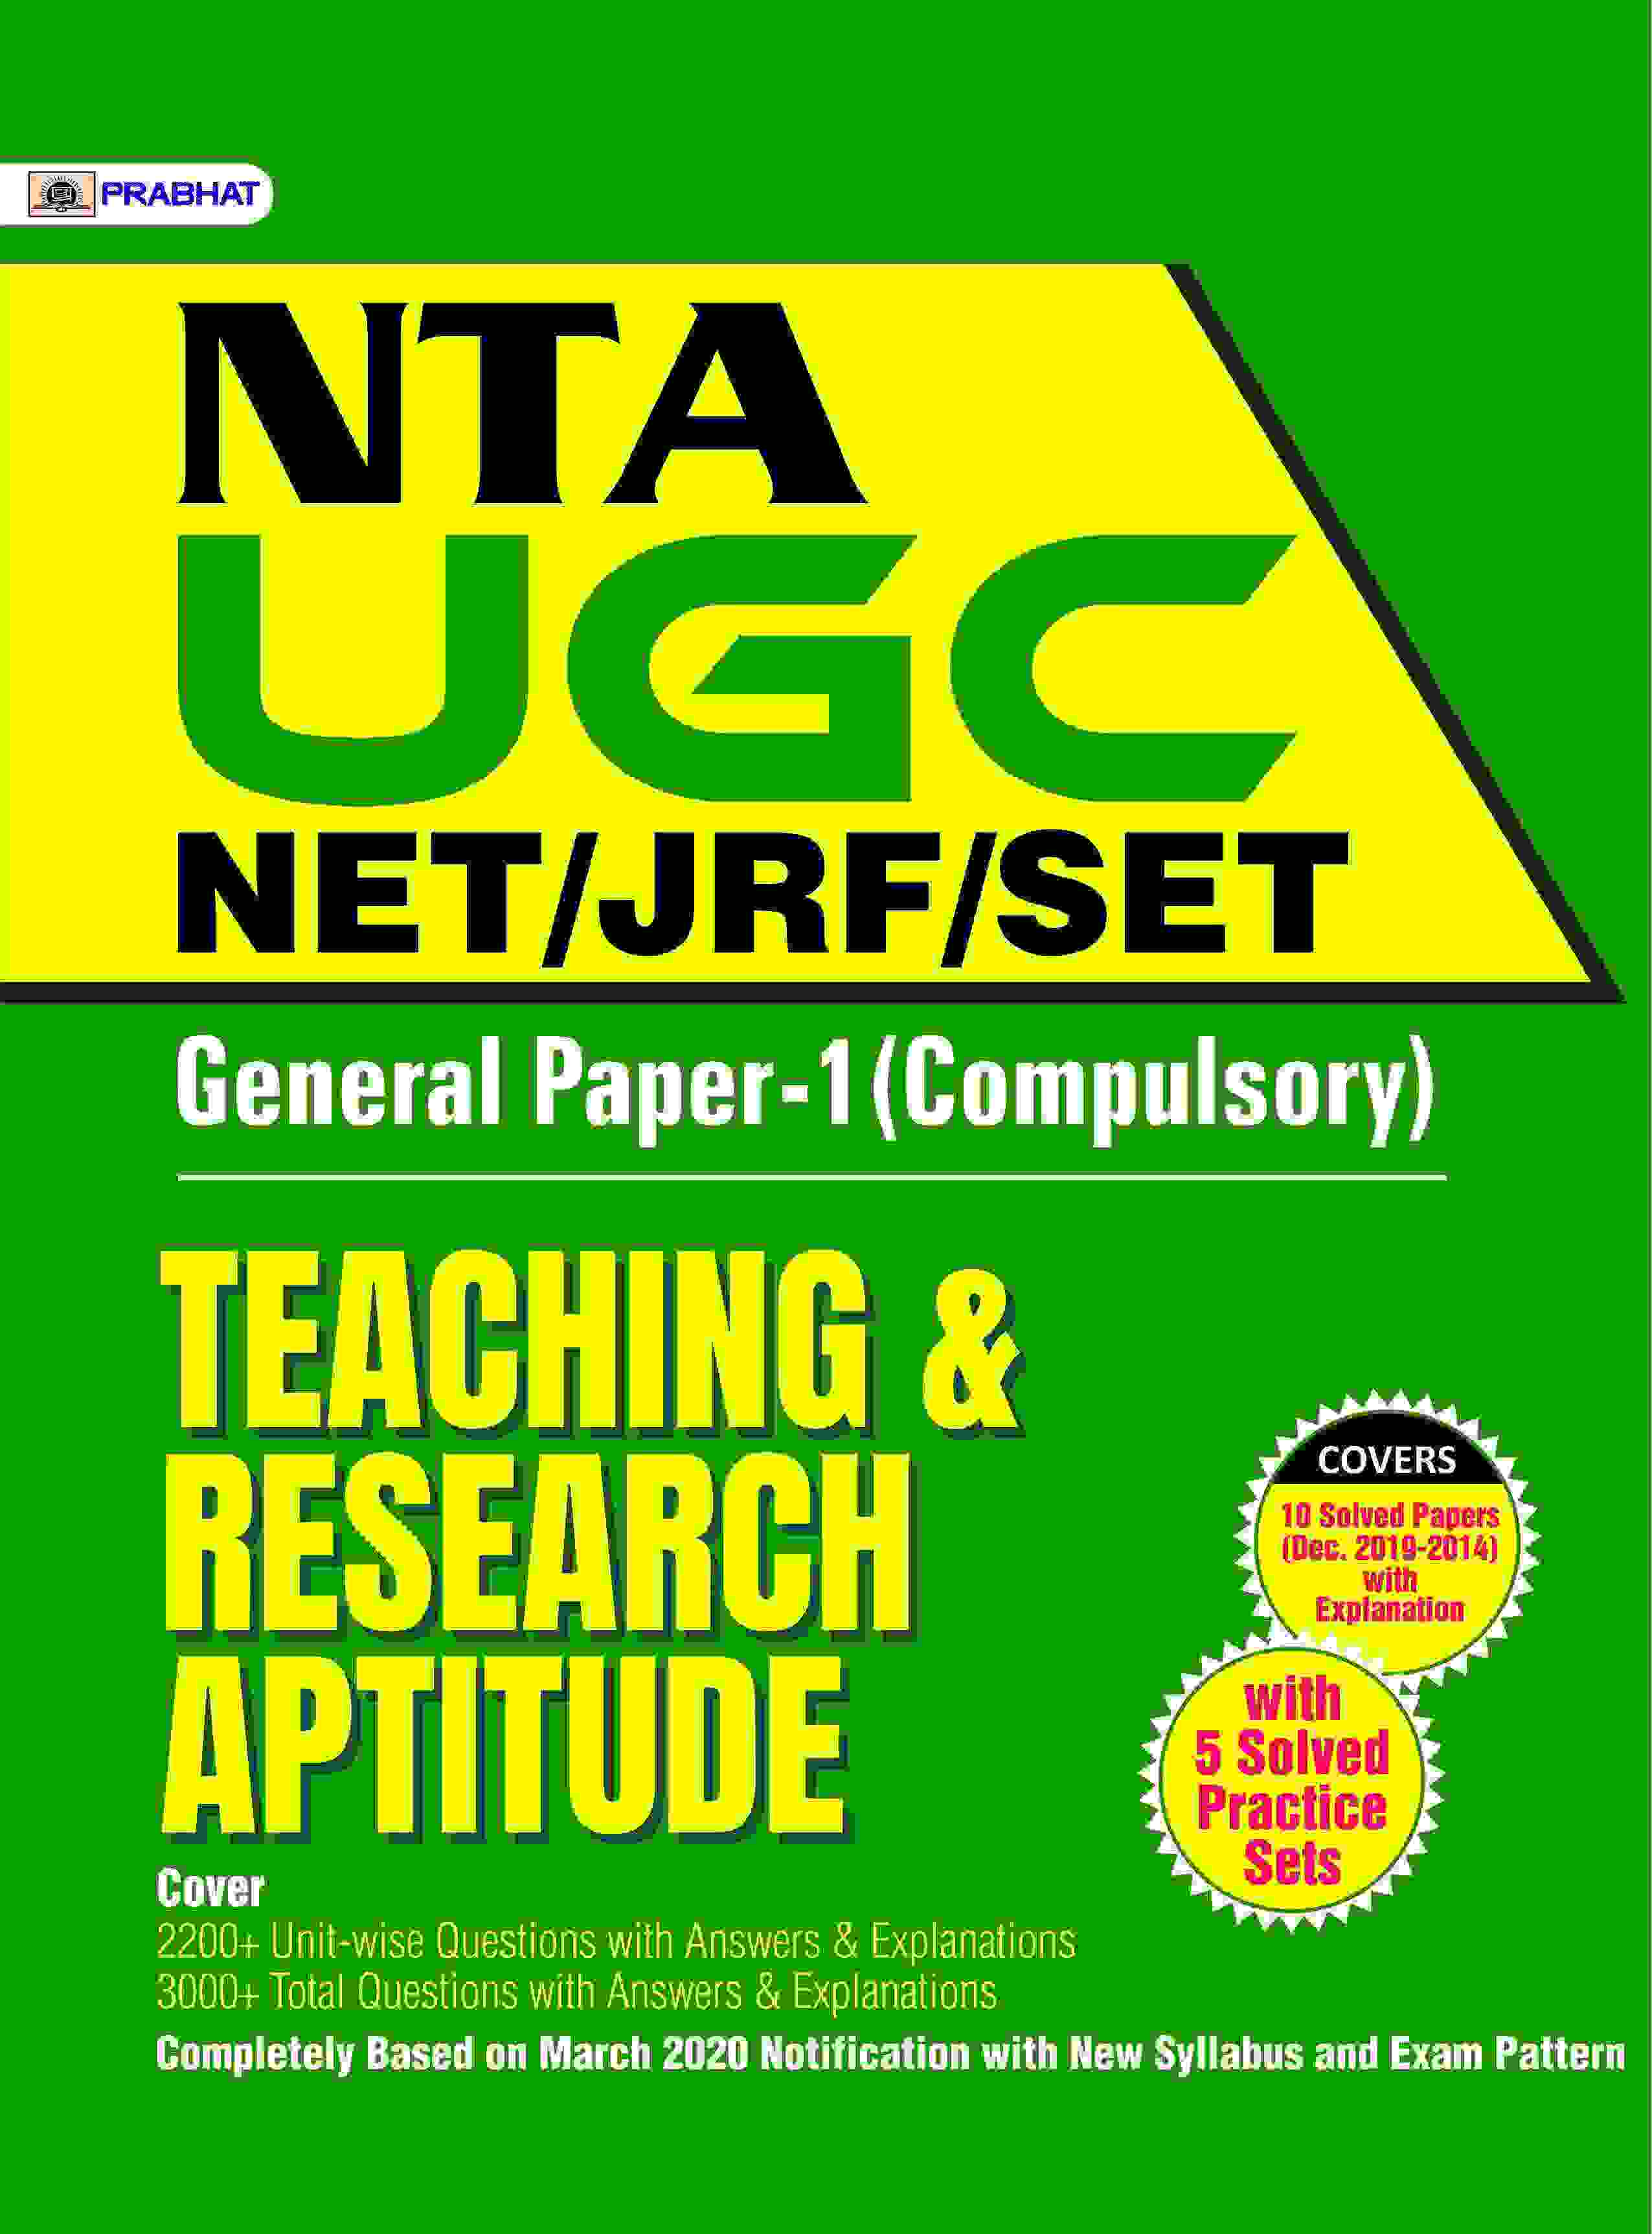 NTA UGC NET/JRF/SET GENERAL PAPER-I TEACHING & RESEARCH APTITUDE WITH 10 SOLVED PAPERS AND 5 PRACTICE SETS 